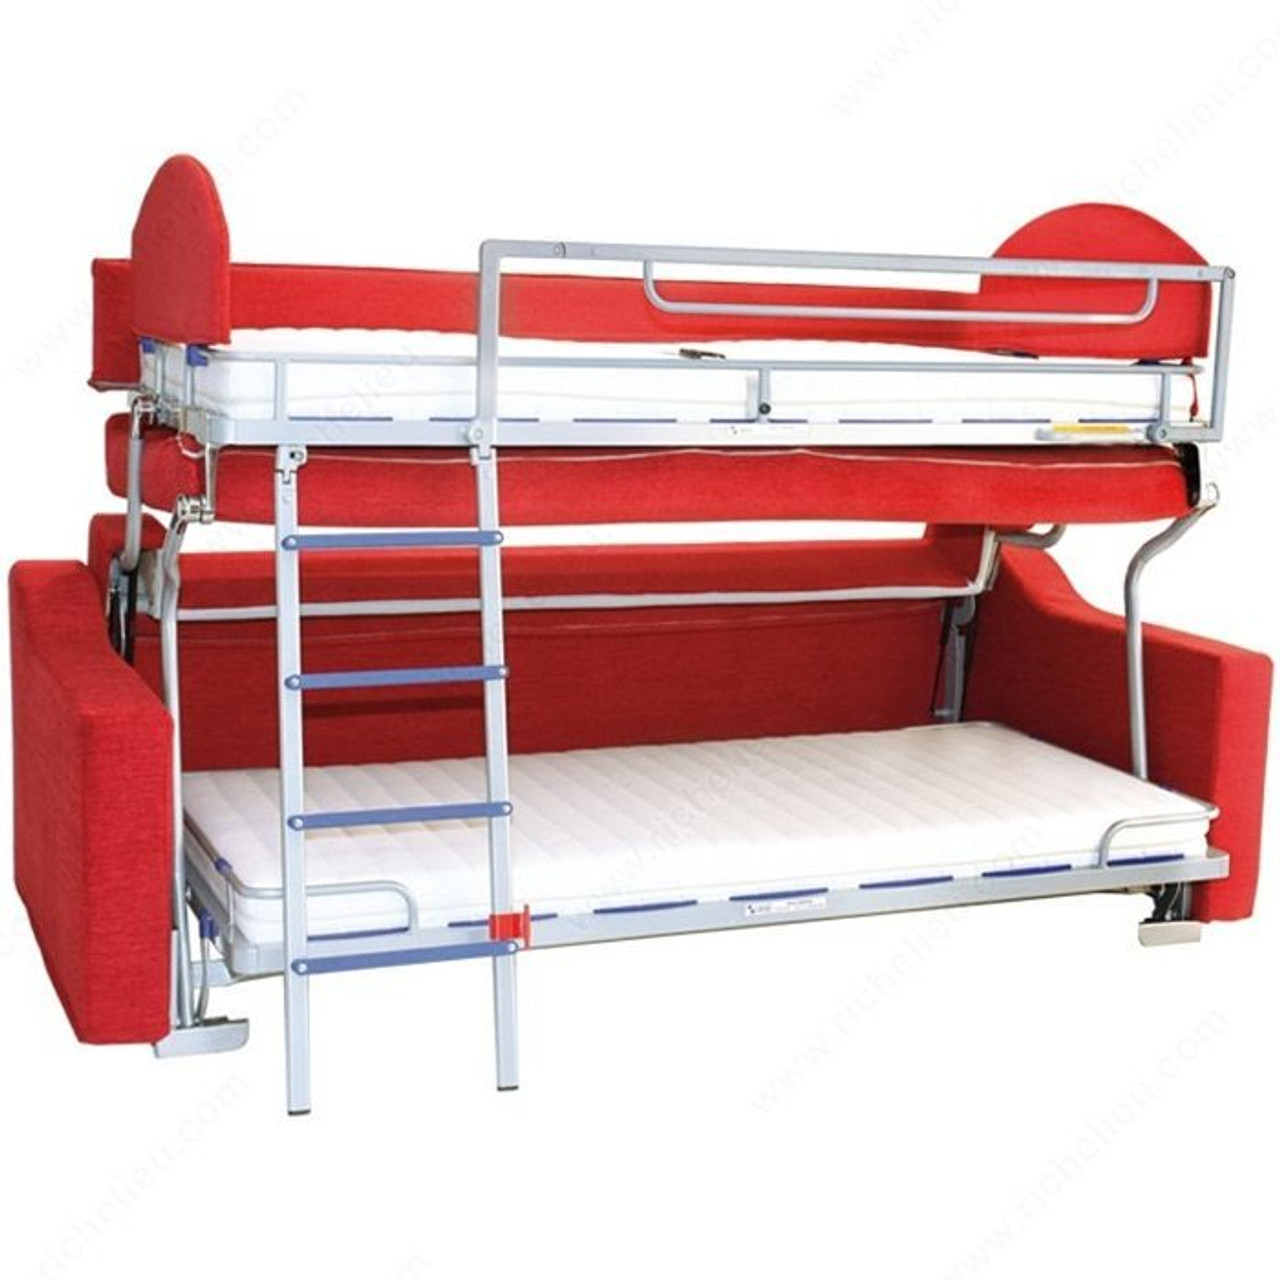 Italiaans circulatie gebied Collapsible Foldable Bunk Bed Bank Bed video Frame Only -No upholstery  7'x3'x27" - HANDYCT